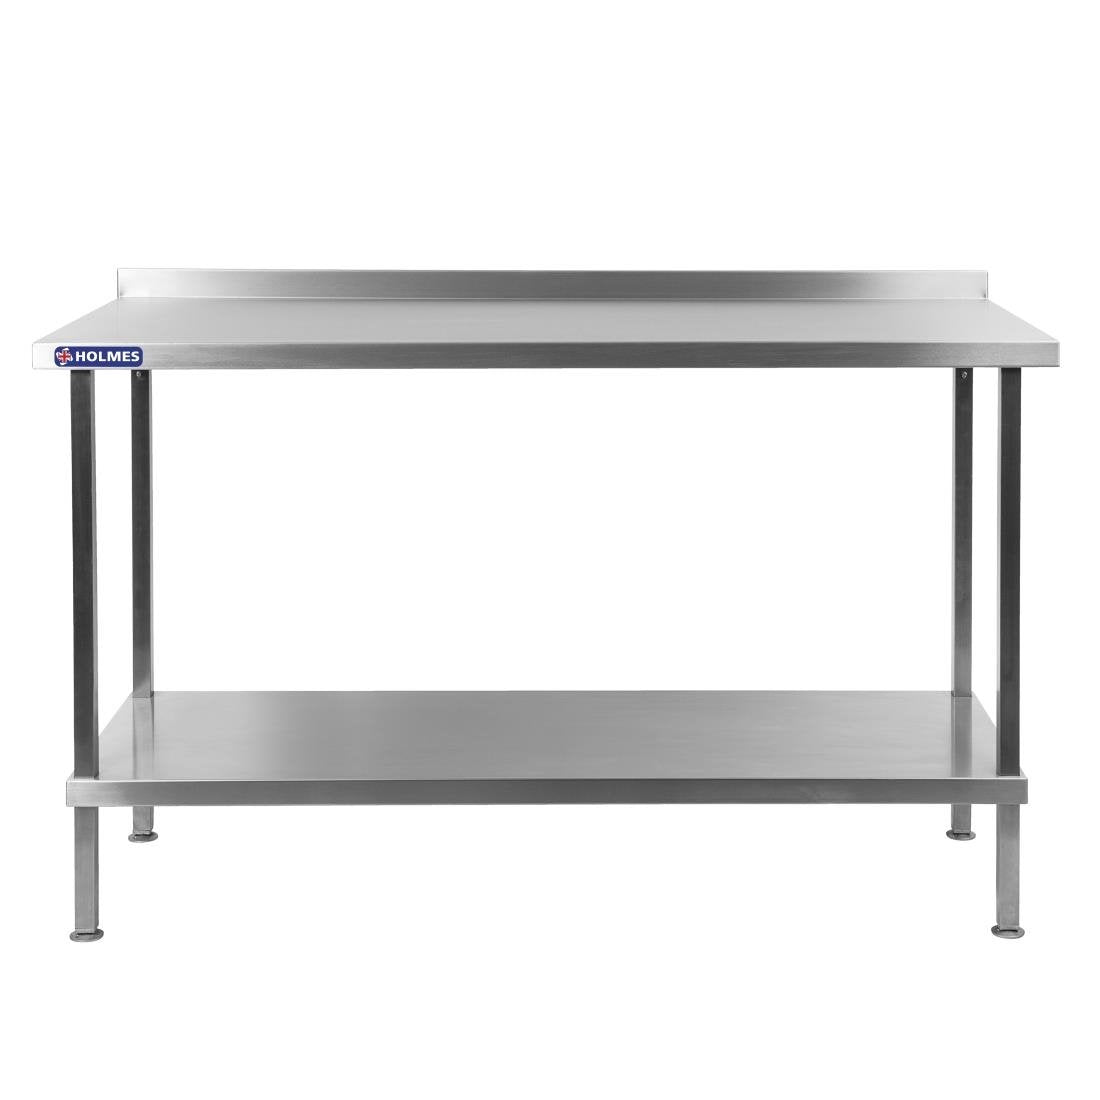 DR032 Holmes Stainless Steel Wall Table with Upstand 2100mm JD Catering Equipment Solutions Ltd